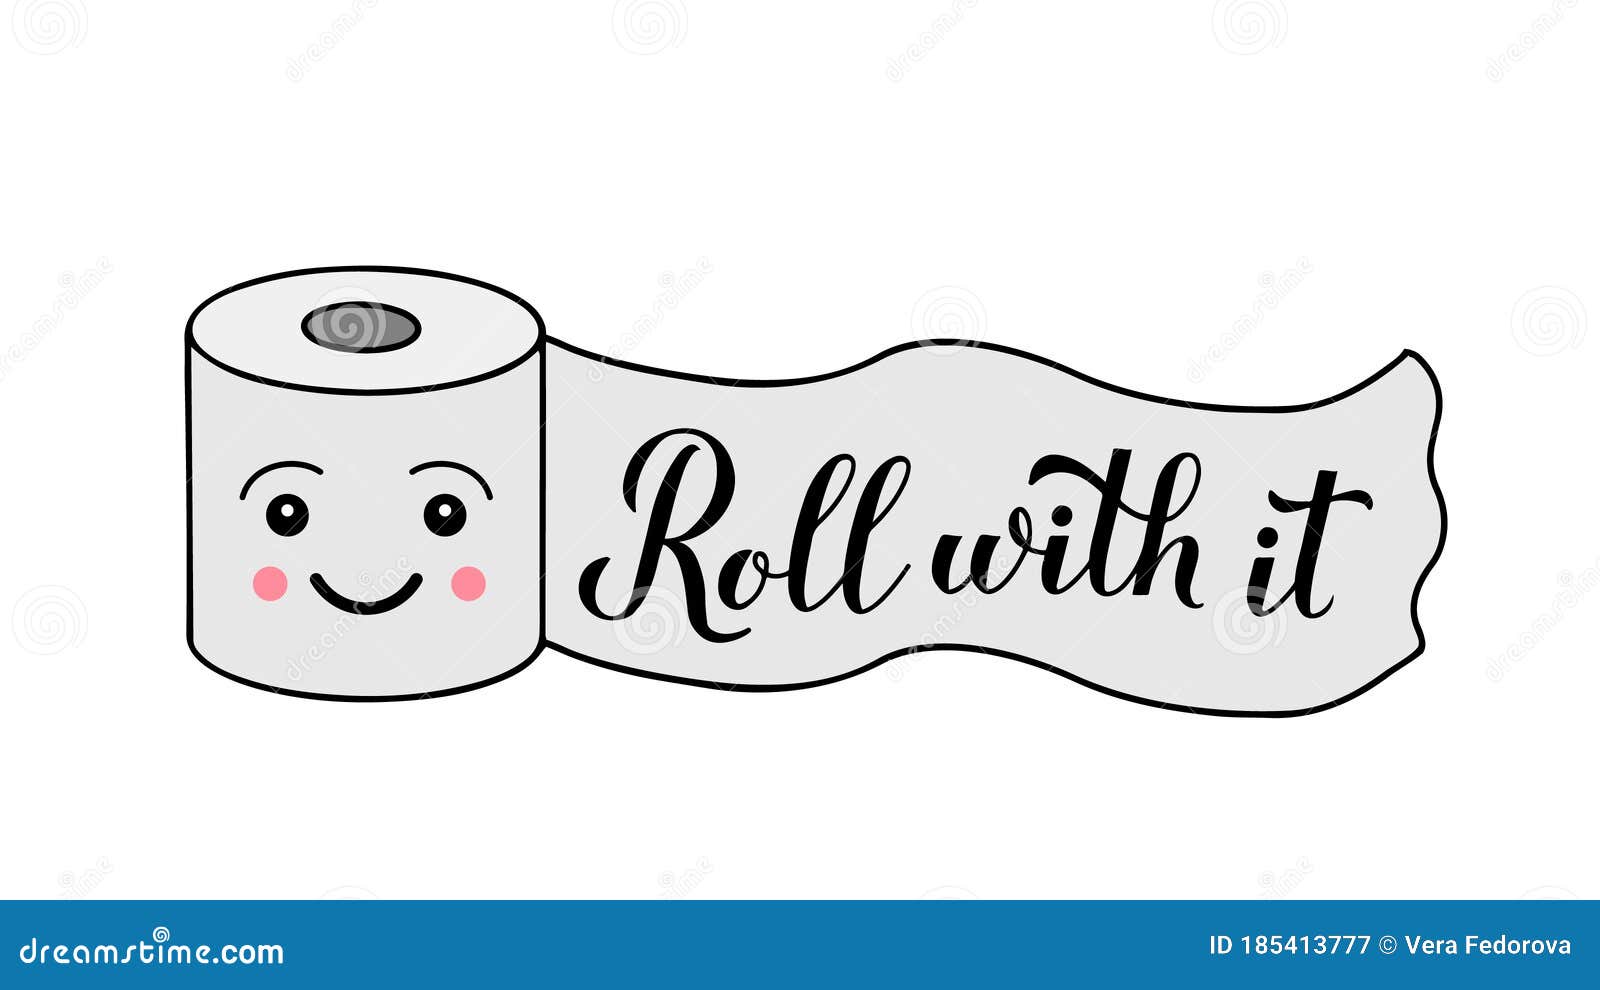 Roll with it Calligraphy Hand Lettering on Cute Cartoon Toilet Paper. Funny  Quote Typography Poster Stock Vector - Illustration of crisis, banner:  185413777